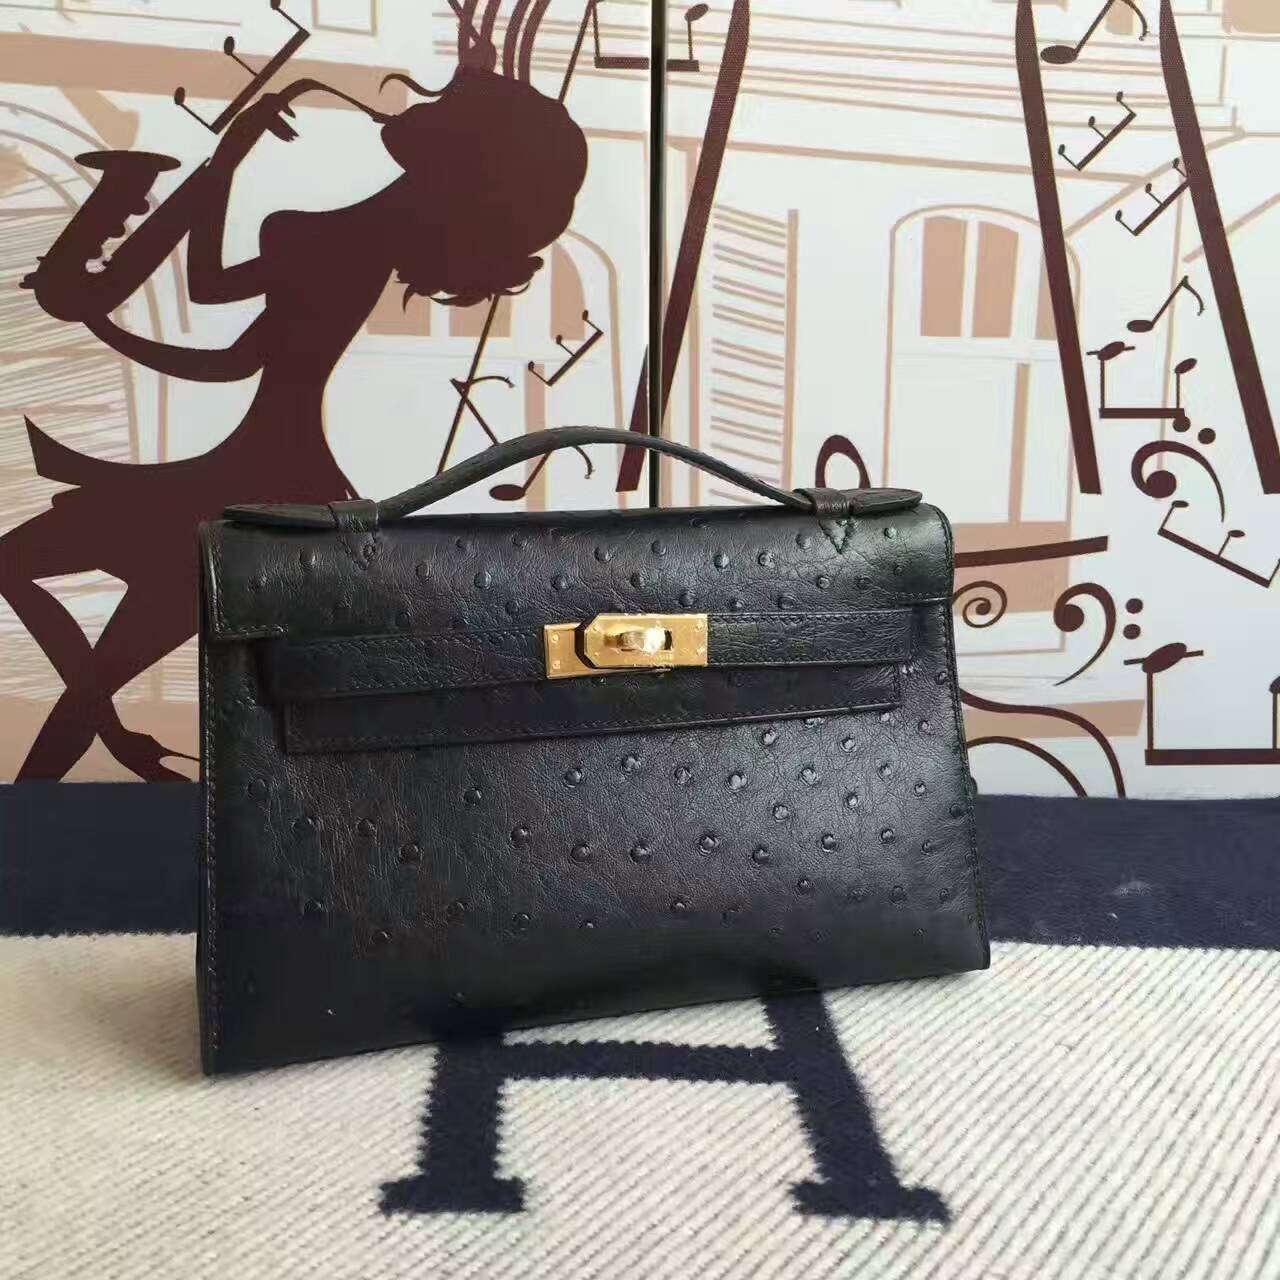 Discount Hermes Minikelly Clutch Bag in CK89 Black Ostrich Leather